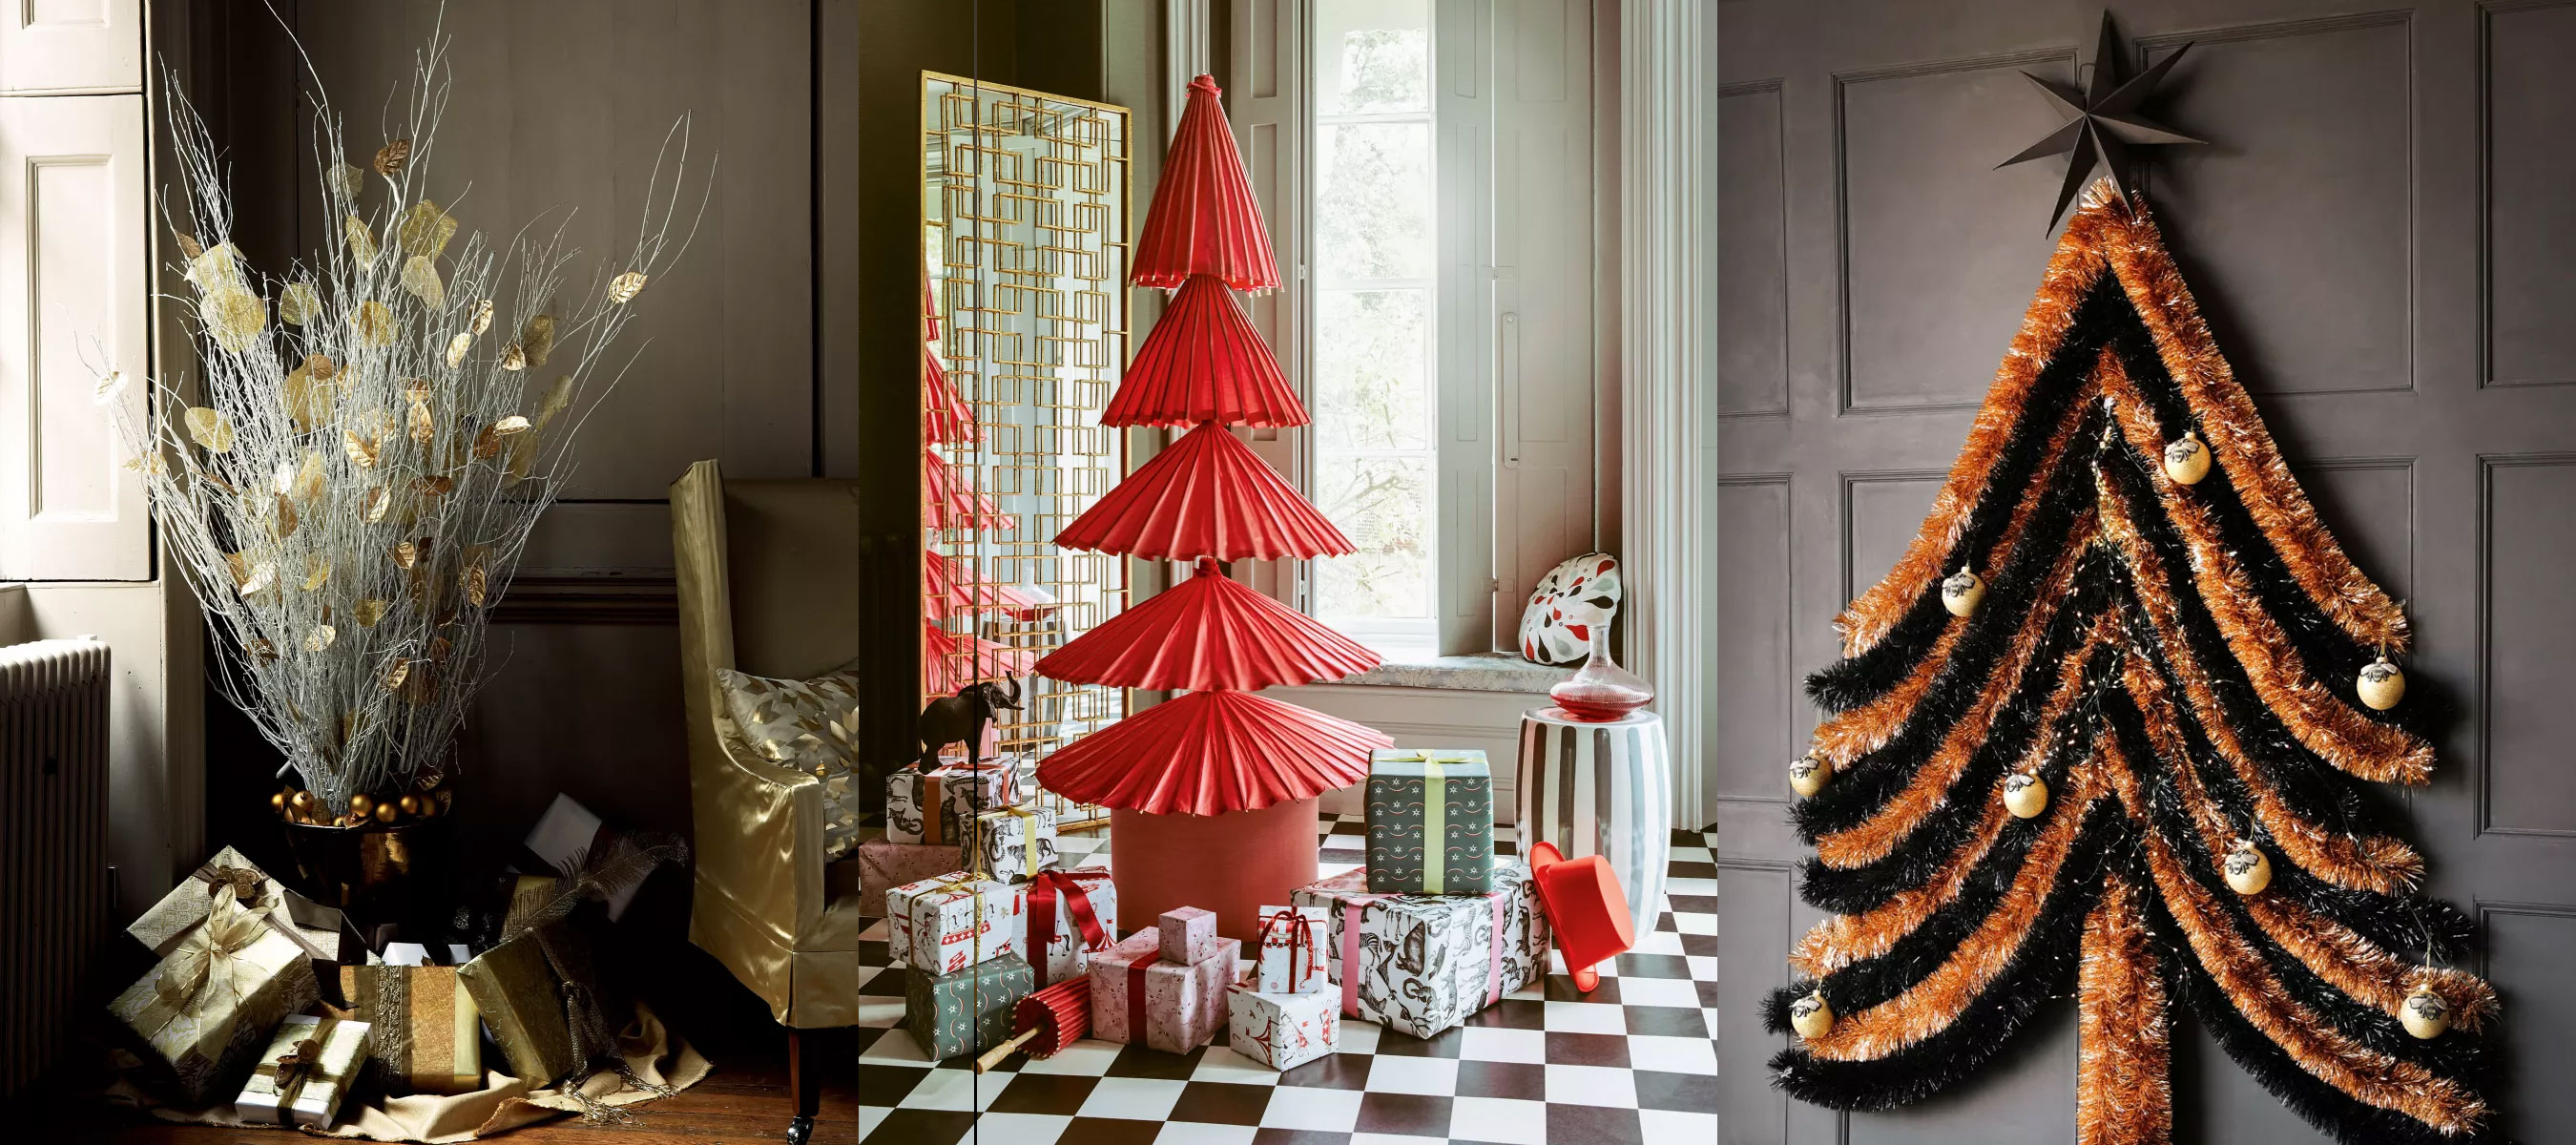 New Collection Of Christmas Decorations By Zara Home - family  holiday.net/guide to family holidays on the internet